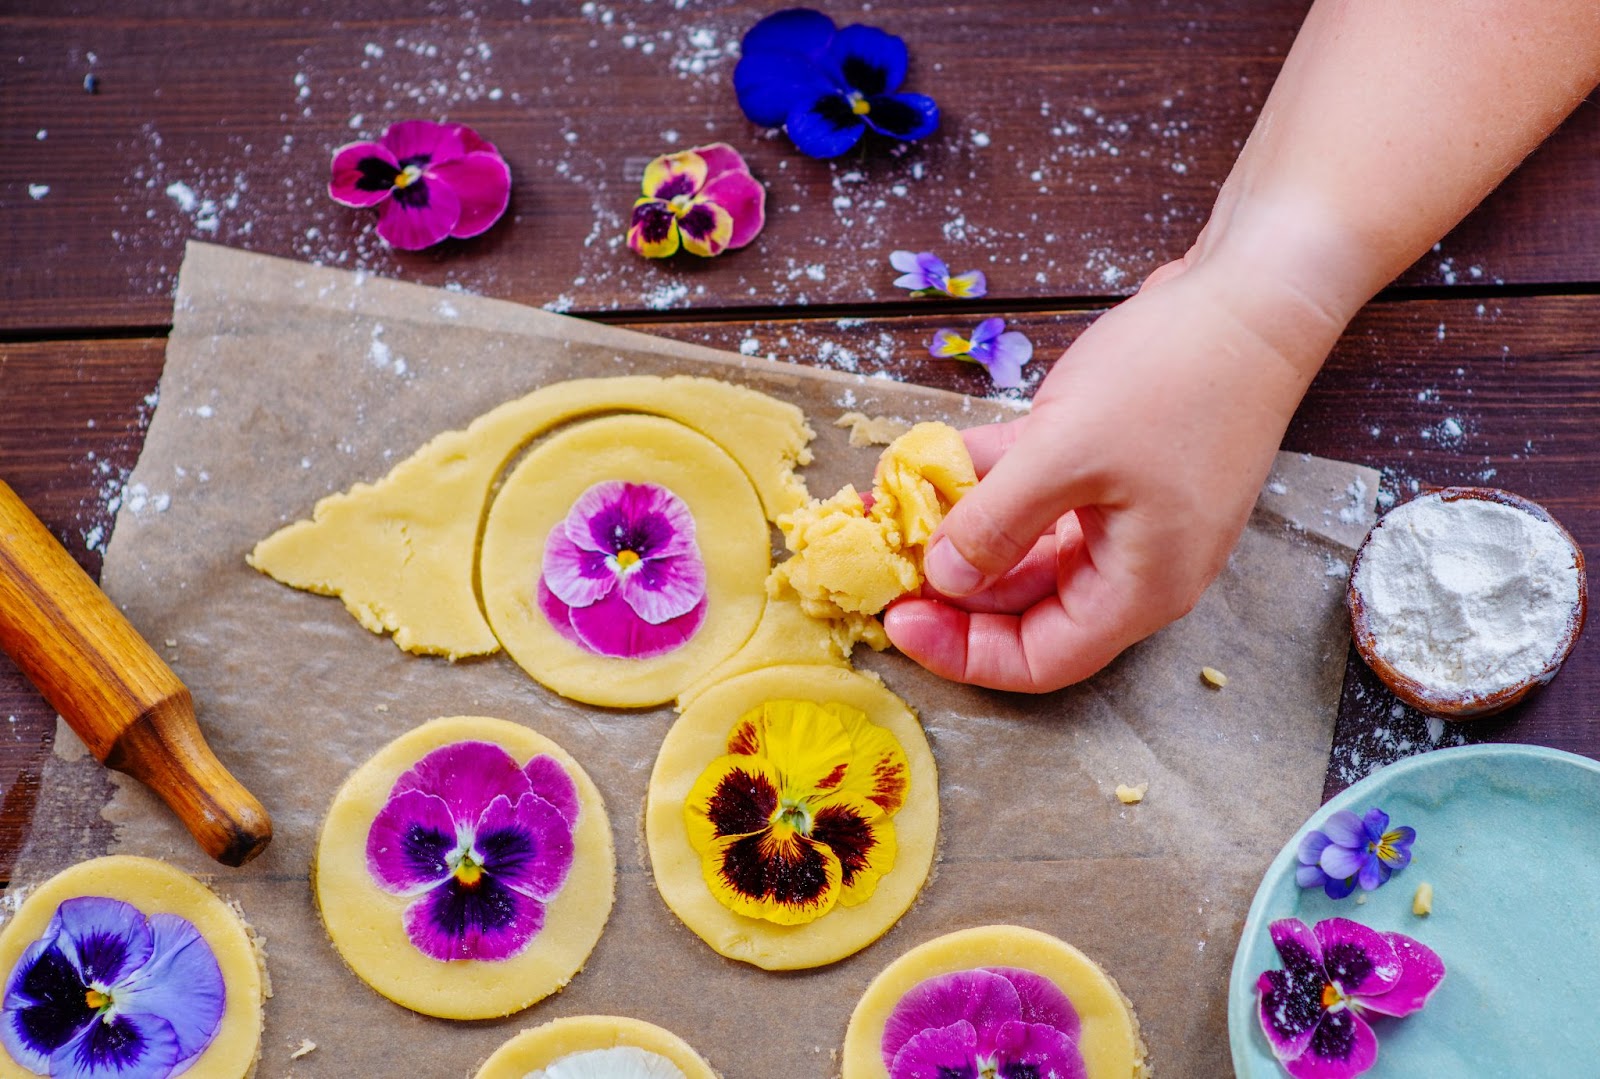 A person using Edible flowers during their baking process.